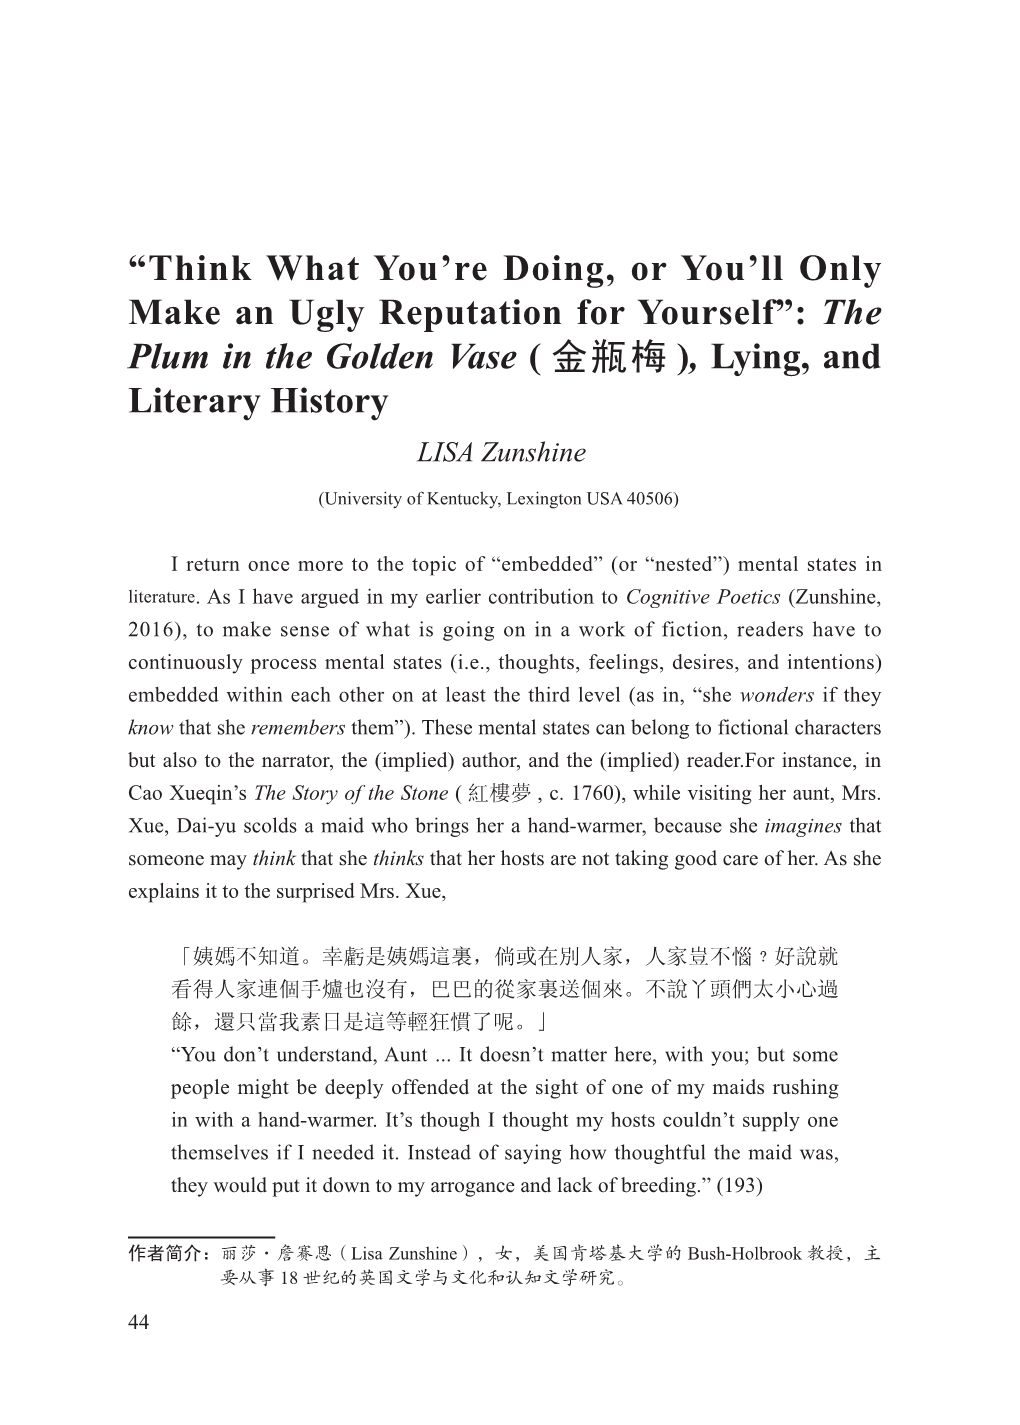 The Plum in the Golden Vase ( 金瓶梅 ), Lying, and Literary History LISA Zunshine1